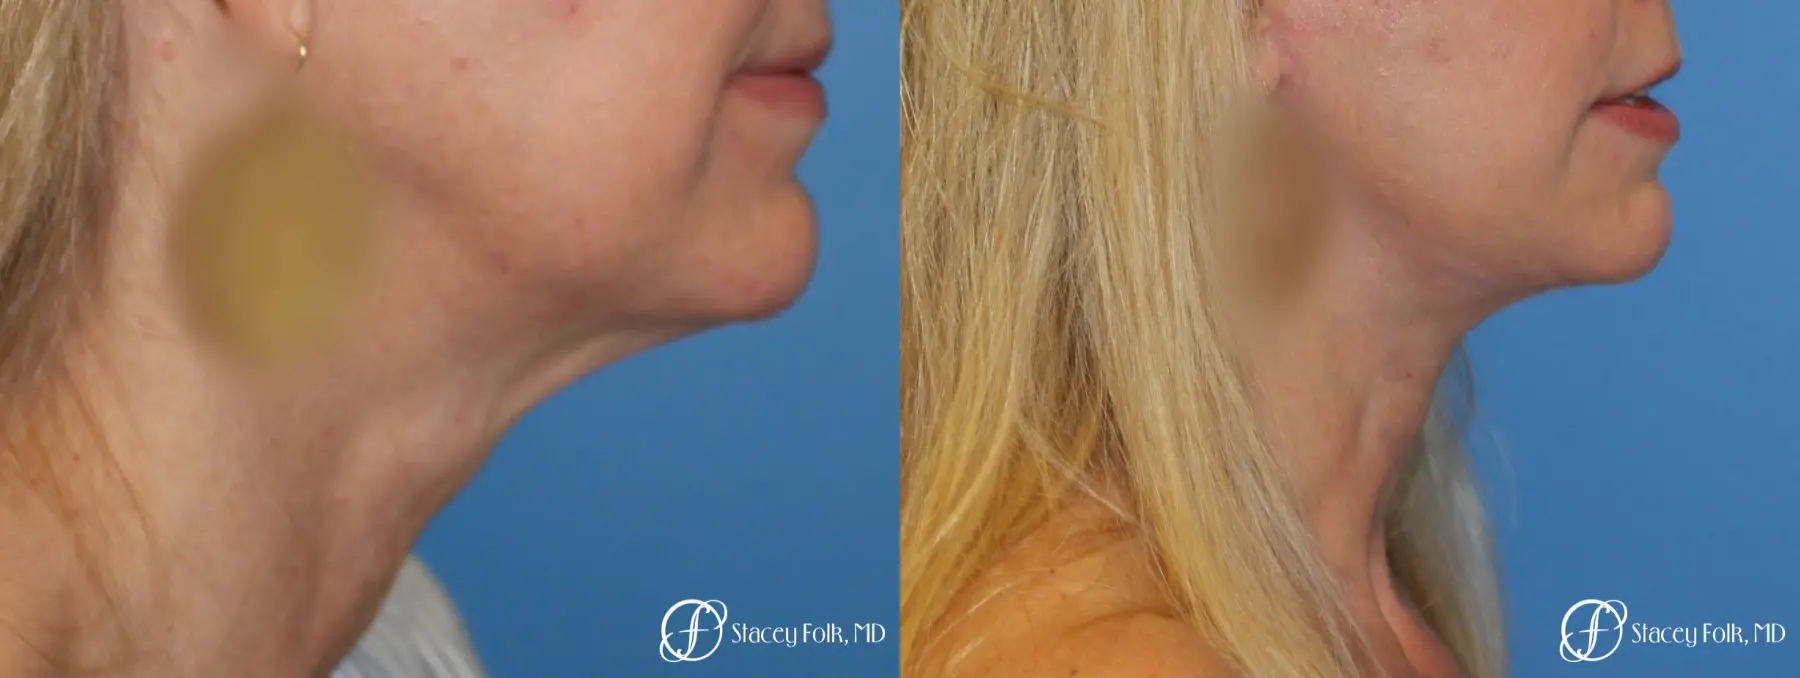 Denver Facial Rejuvenation Face Lift and Fat Injections 7126 - Before and After 1